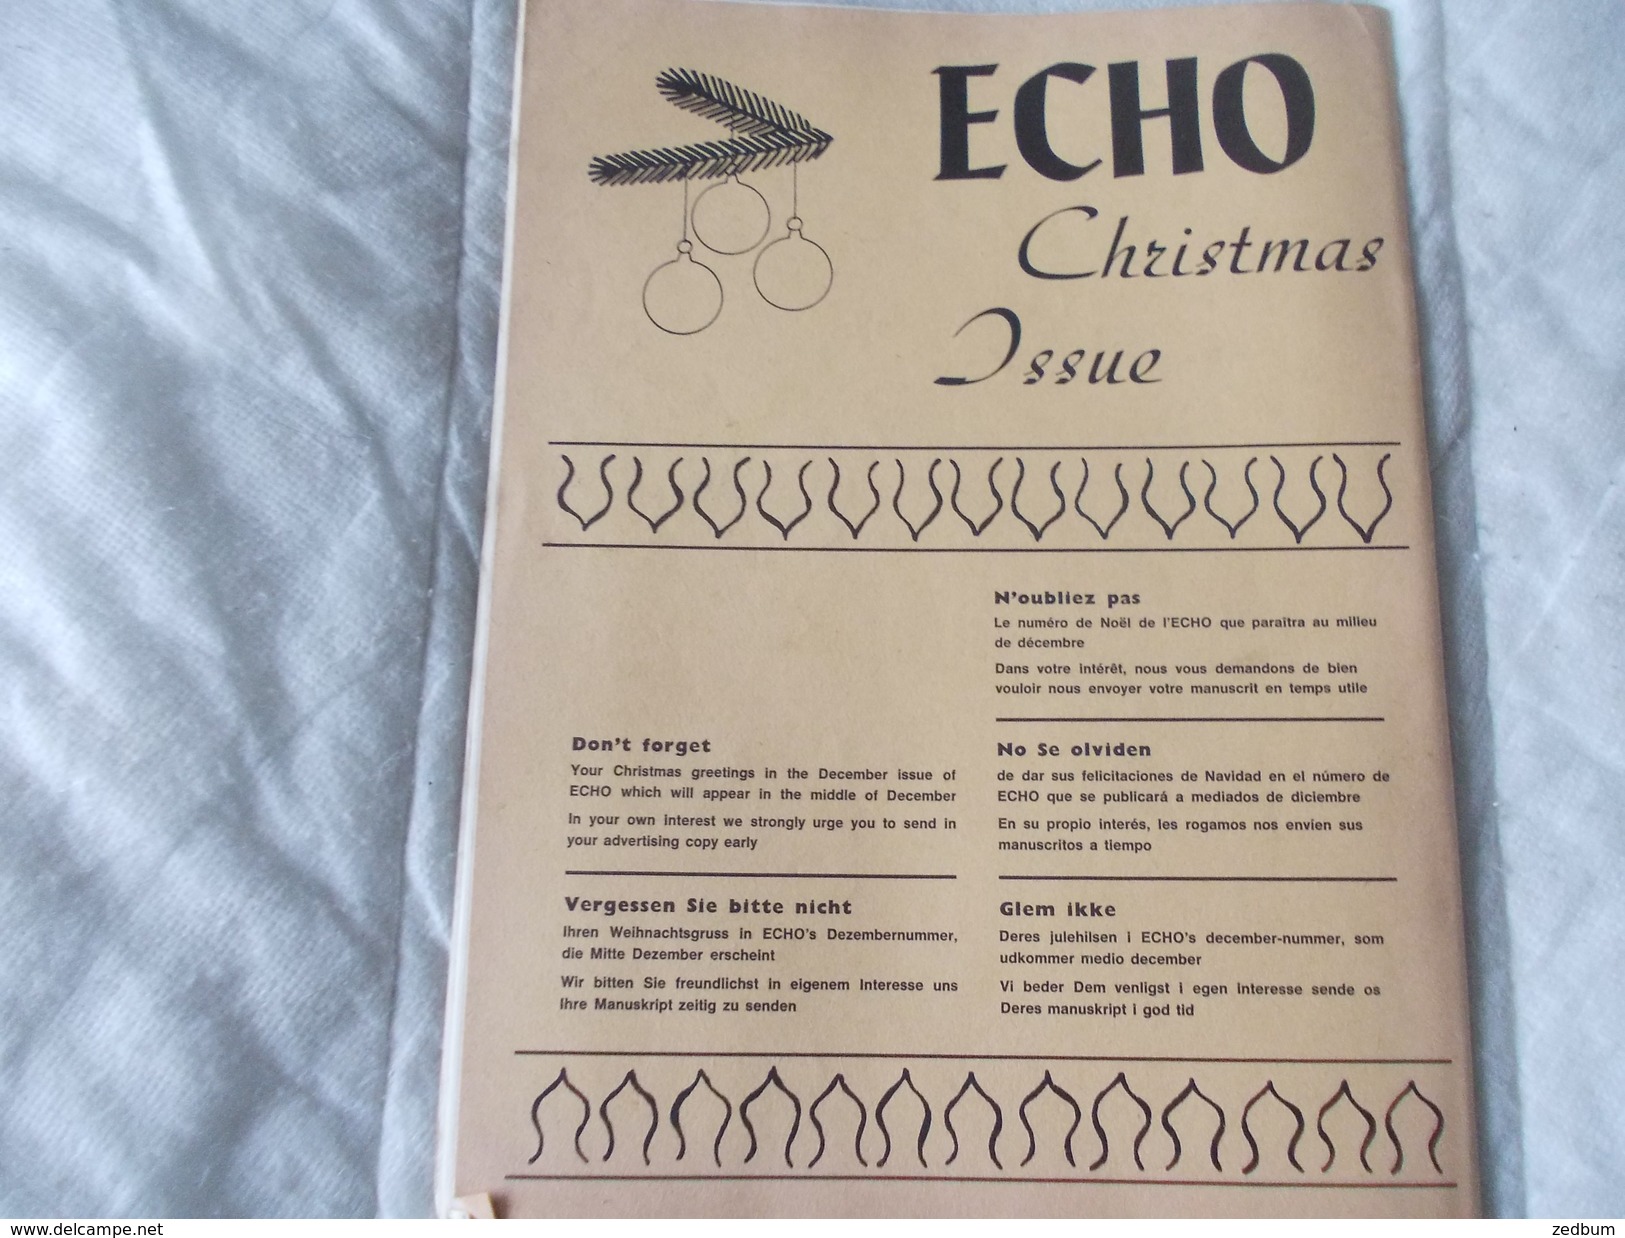 ECHO LTD Professional Circus And Variety Journal Independent International N° 321 November 1968 - Divertimento